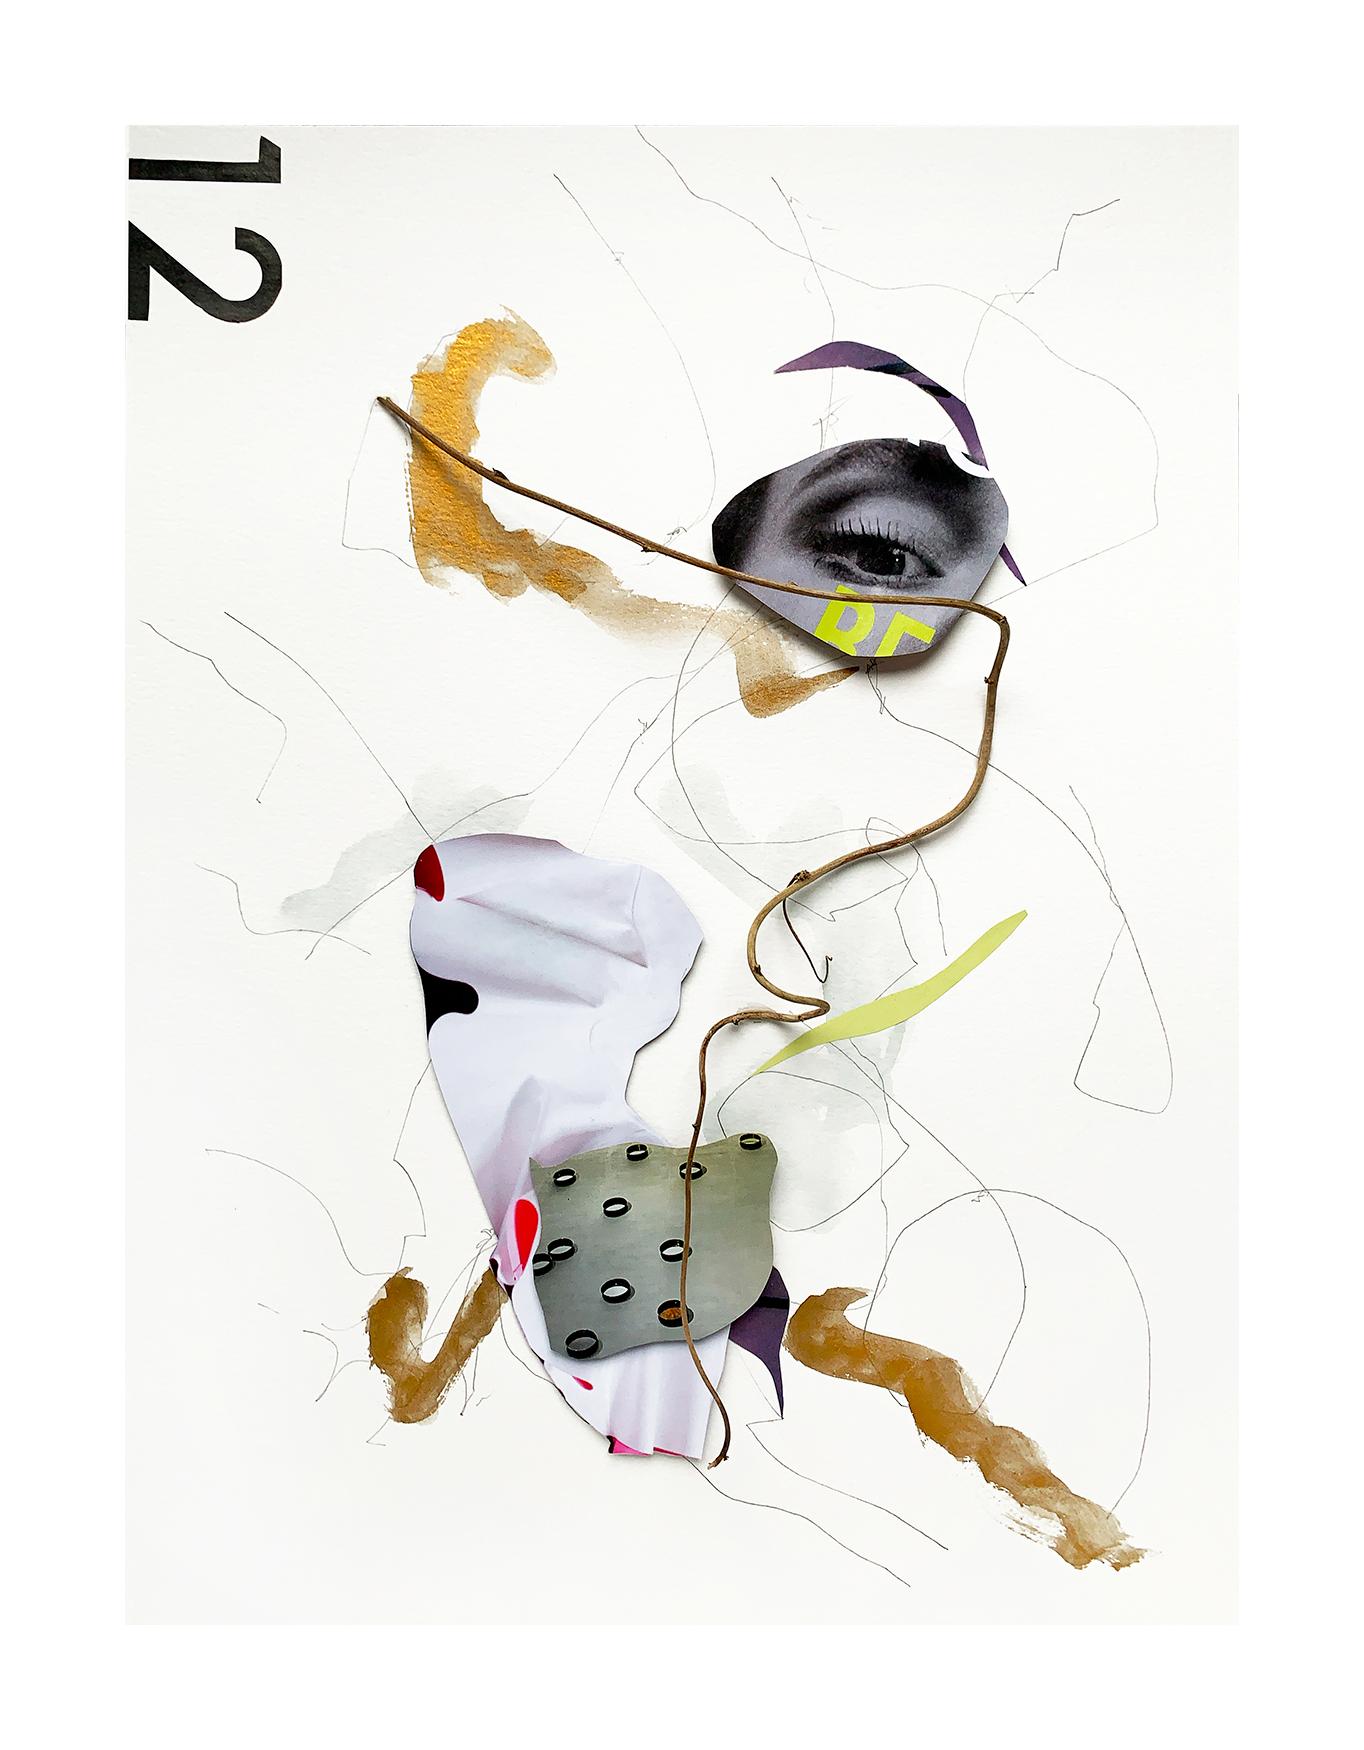 Ron Baxter Smith Still-Life Photograph - Corso NC_23 - Limited Edition Archival Pigment Print of Collage Still Life